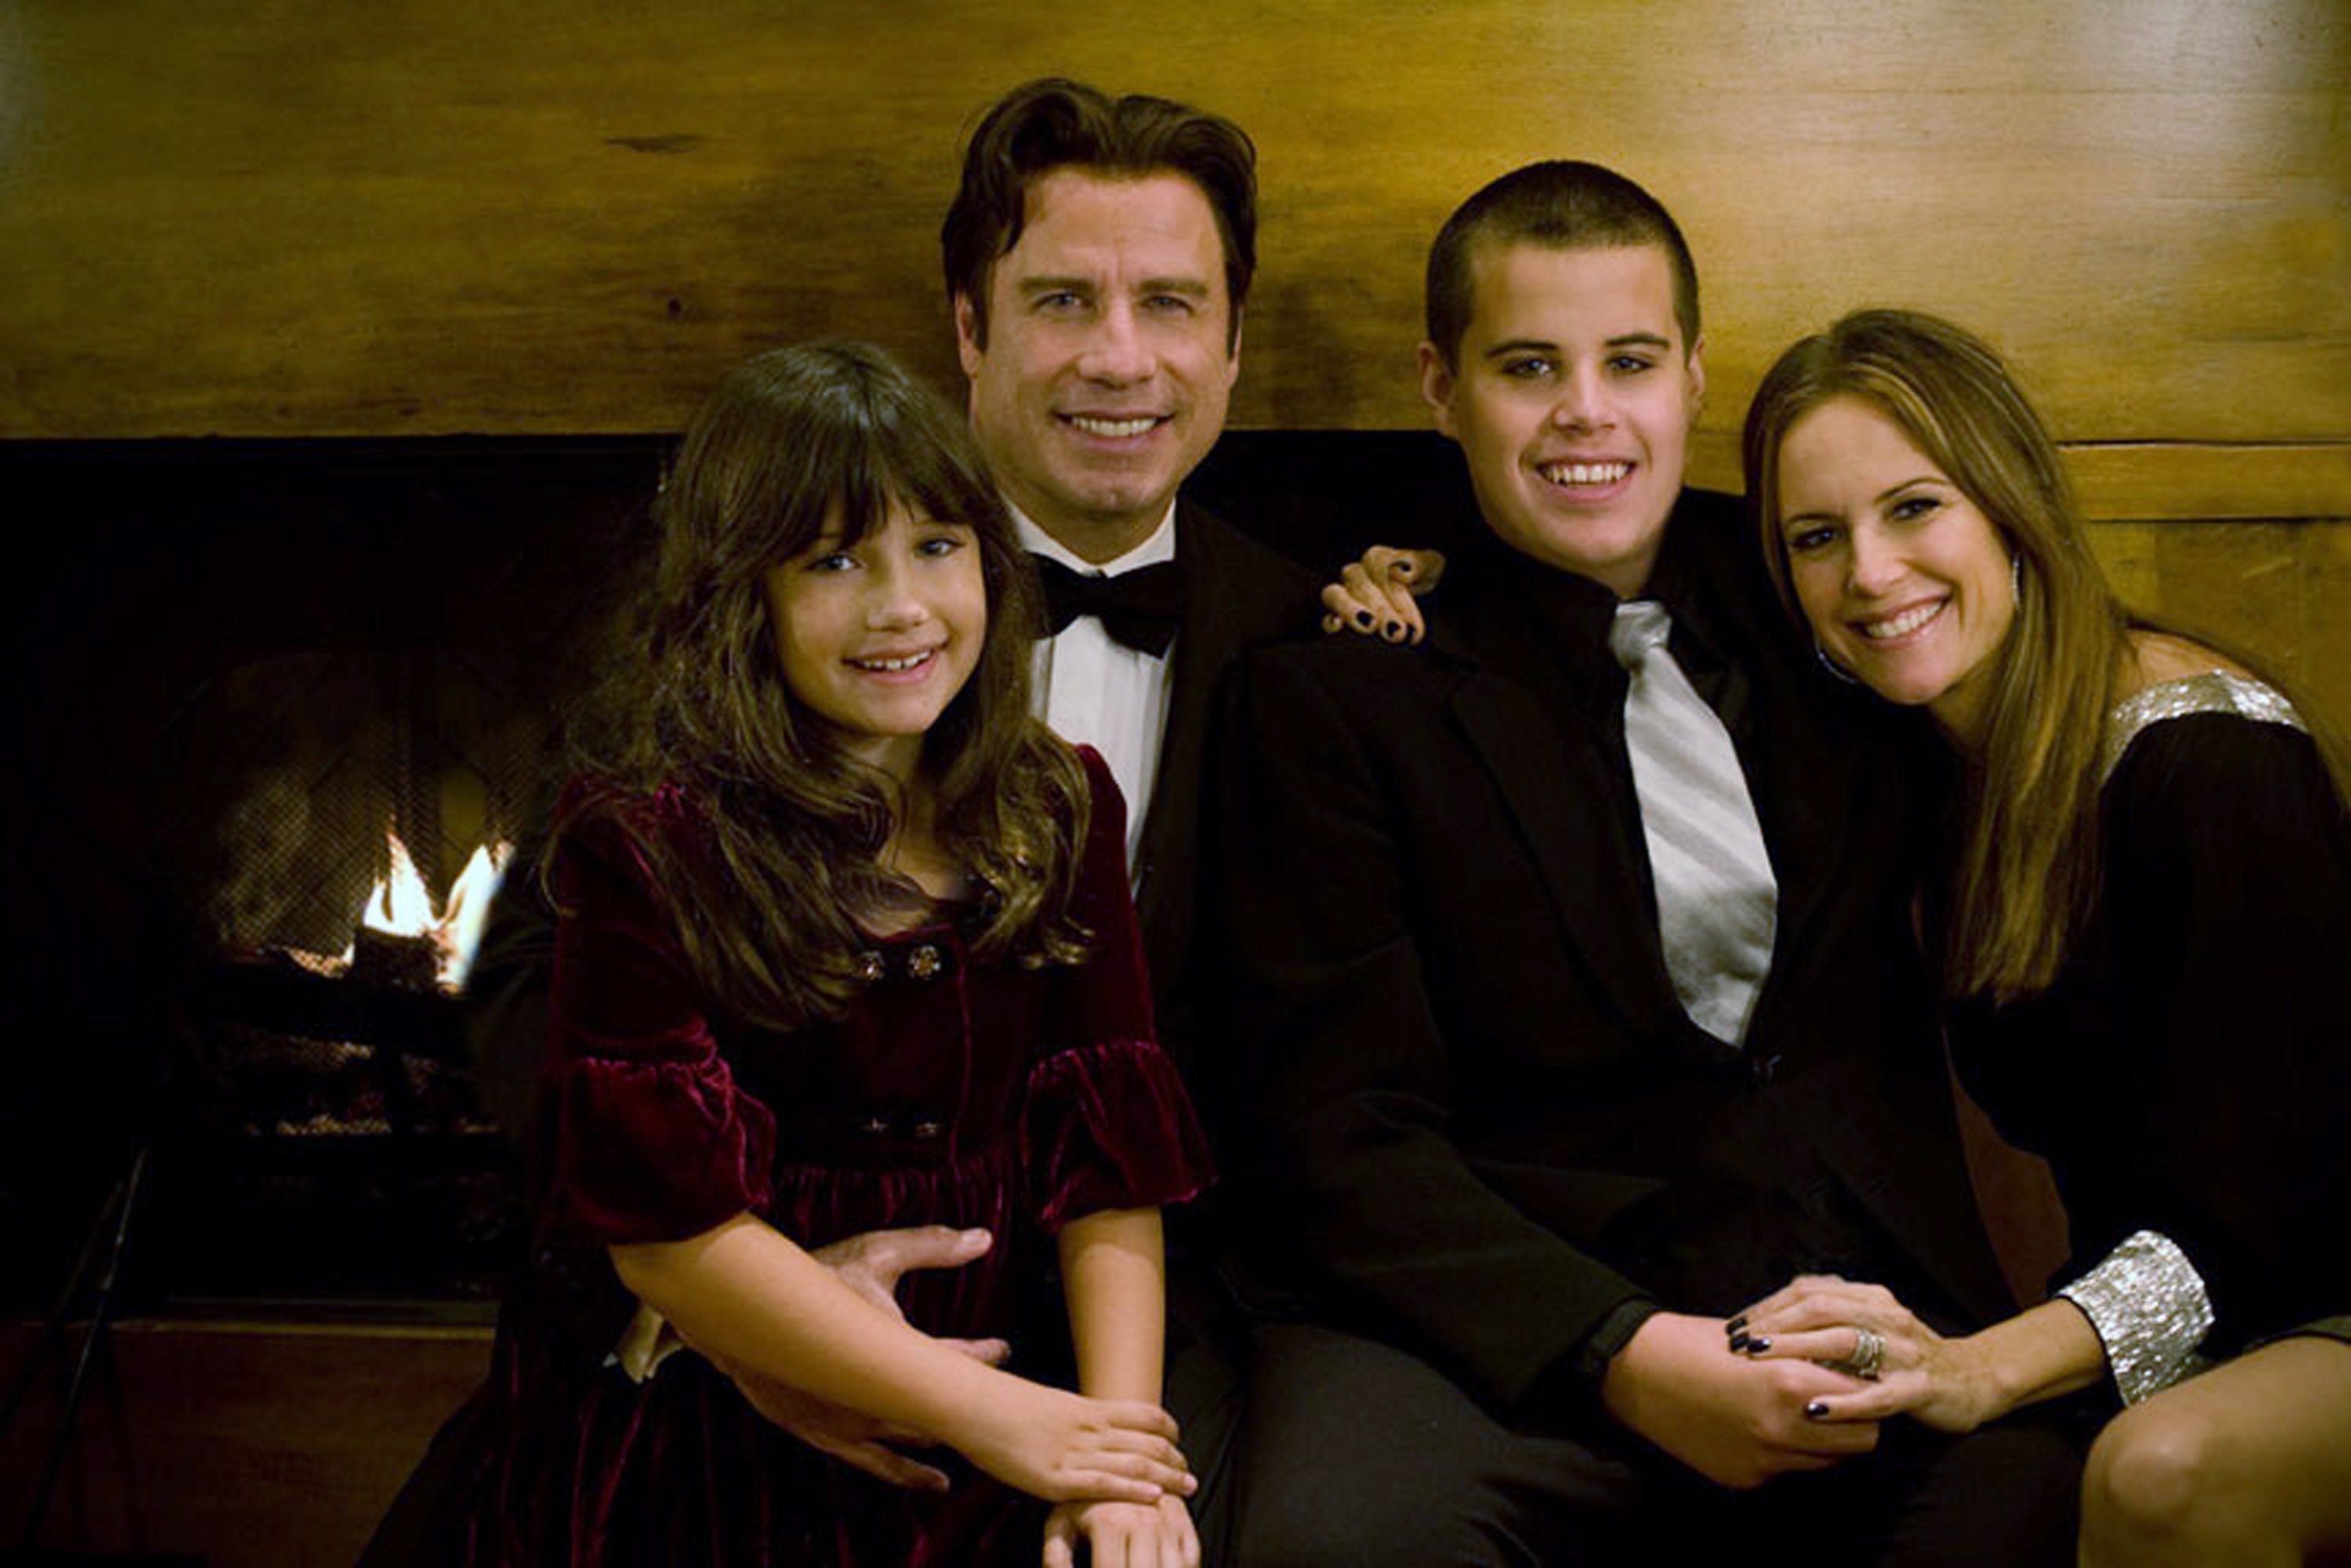 John Travolta (2nd L), his wife Kelly Preston (R) and their children Jett (2nd R) and Ella pose in this undated picture | Source: Getty Images